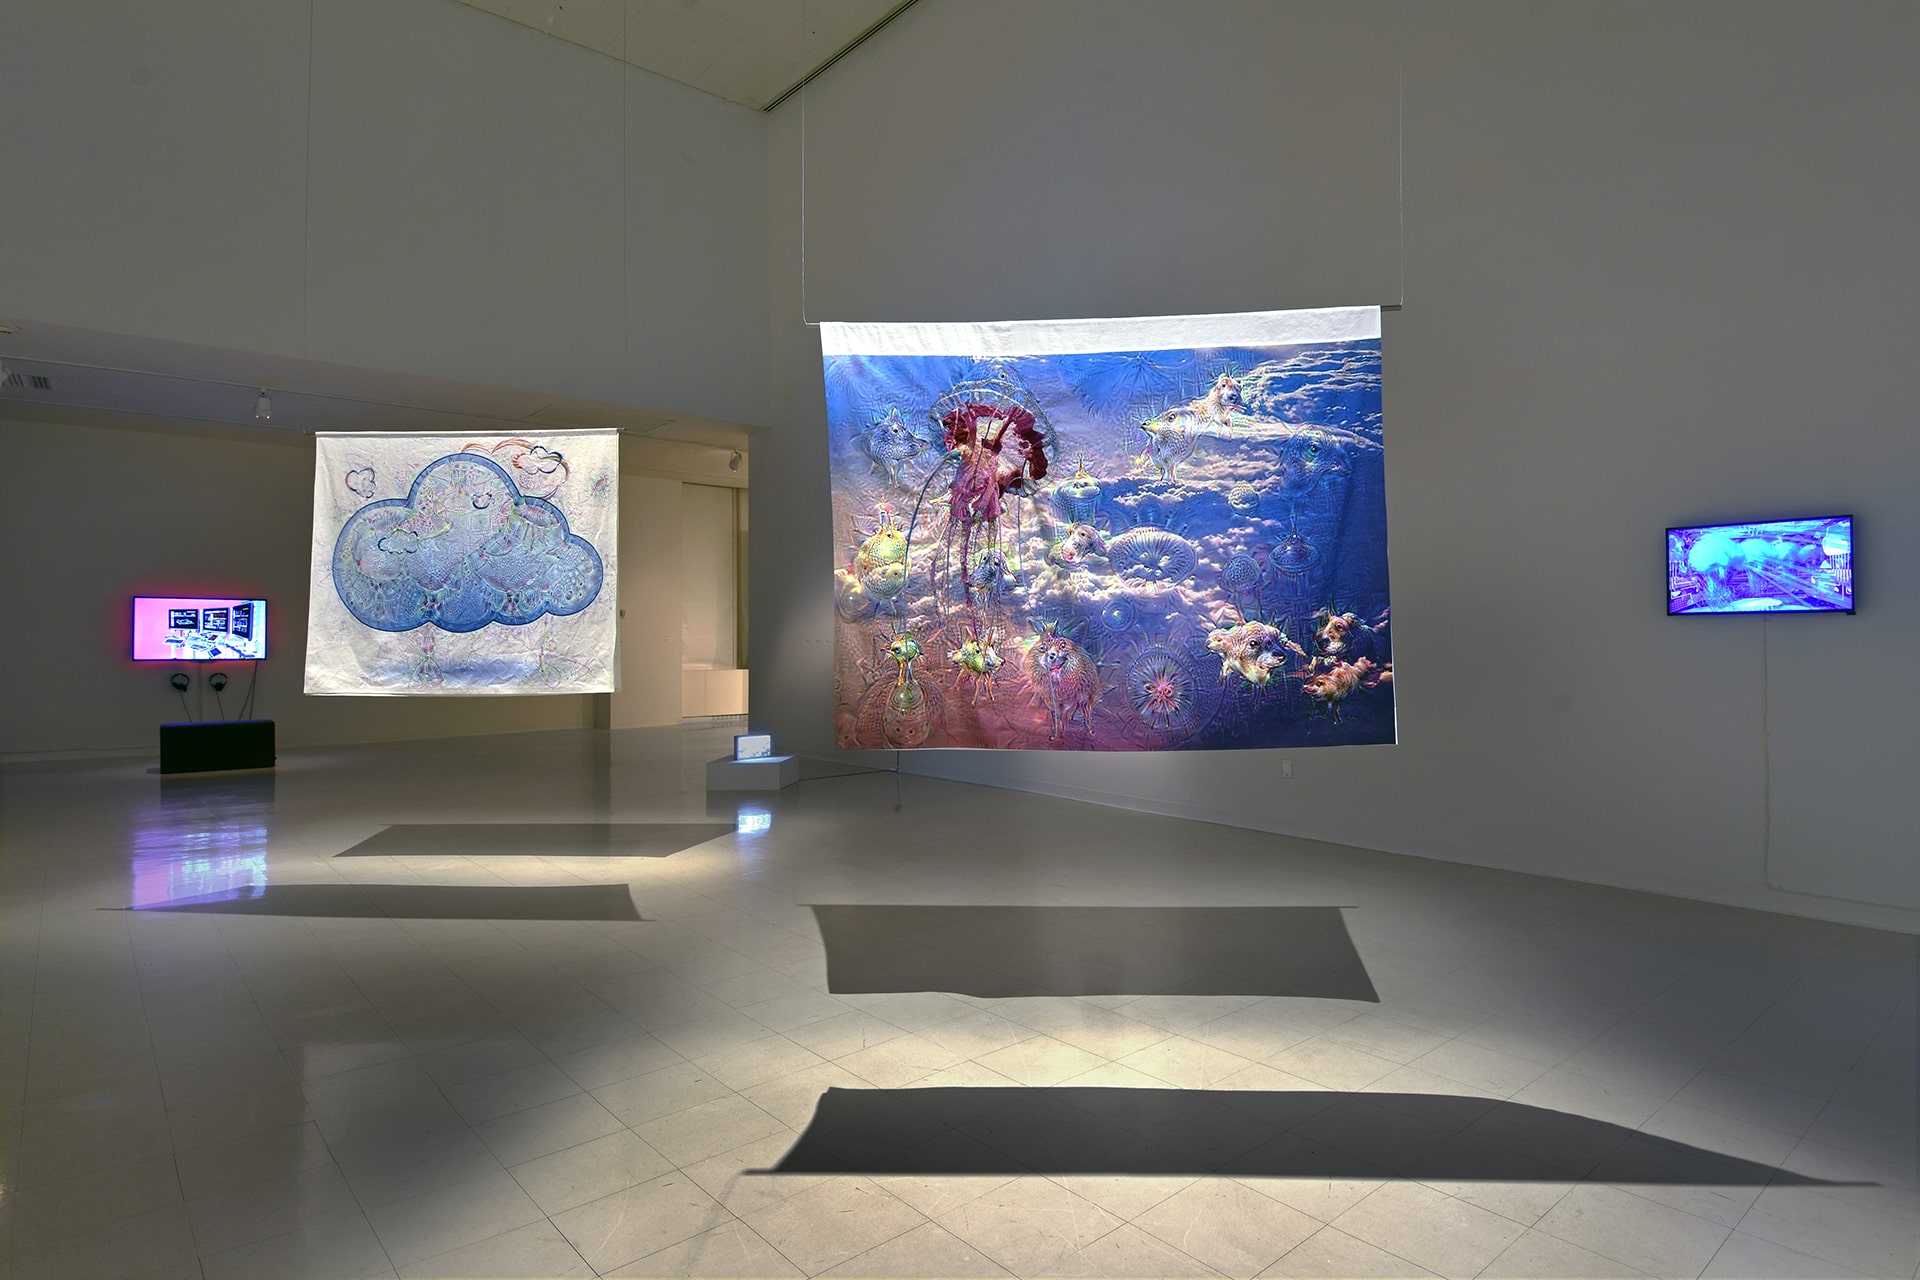 Untitled 1 and 2; two large textile banners with hand embroideries hanging in gallery space